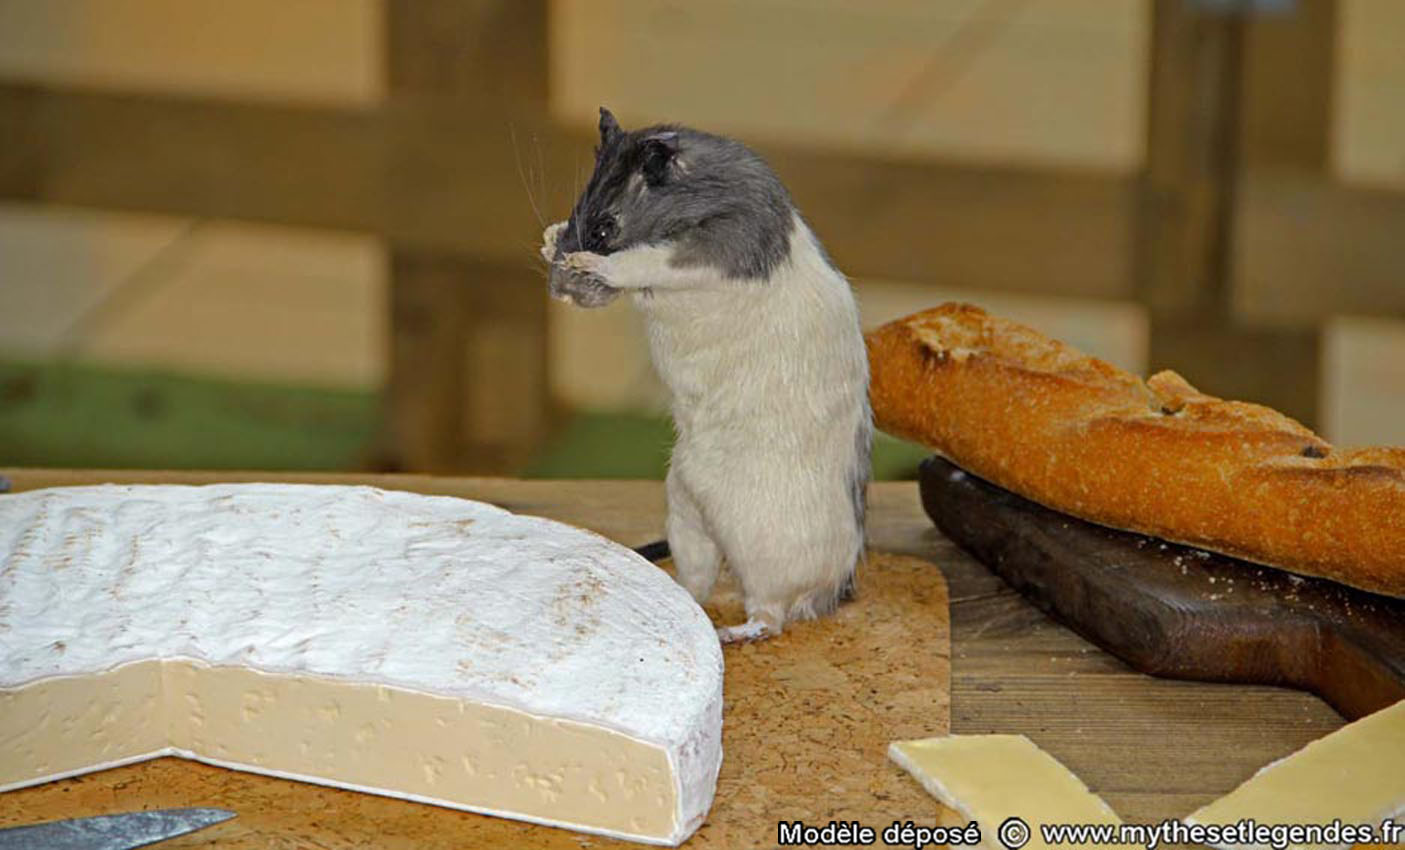 Exhibition The legend of King Arthur (200) Rat nibbling some cheese